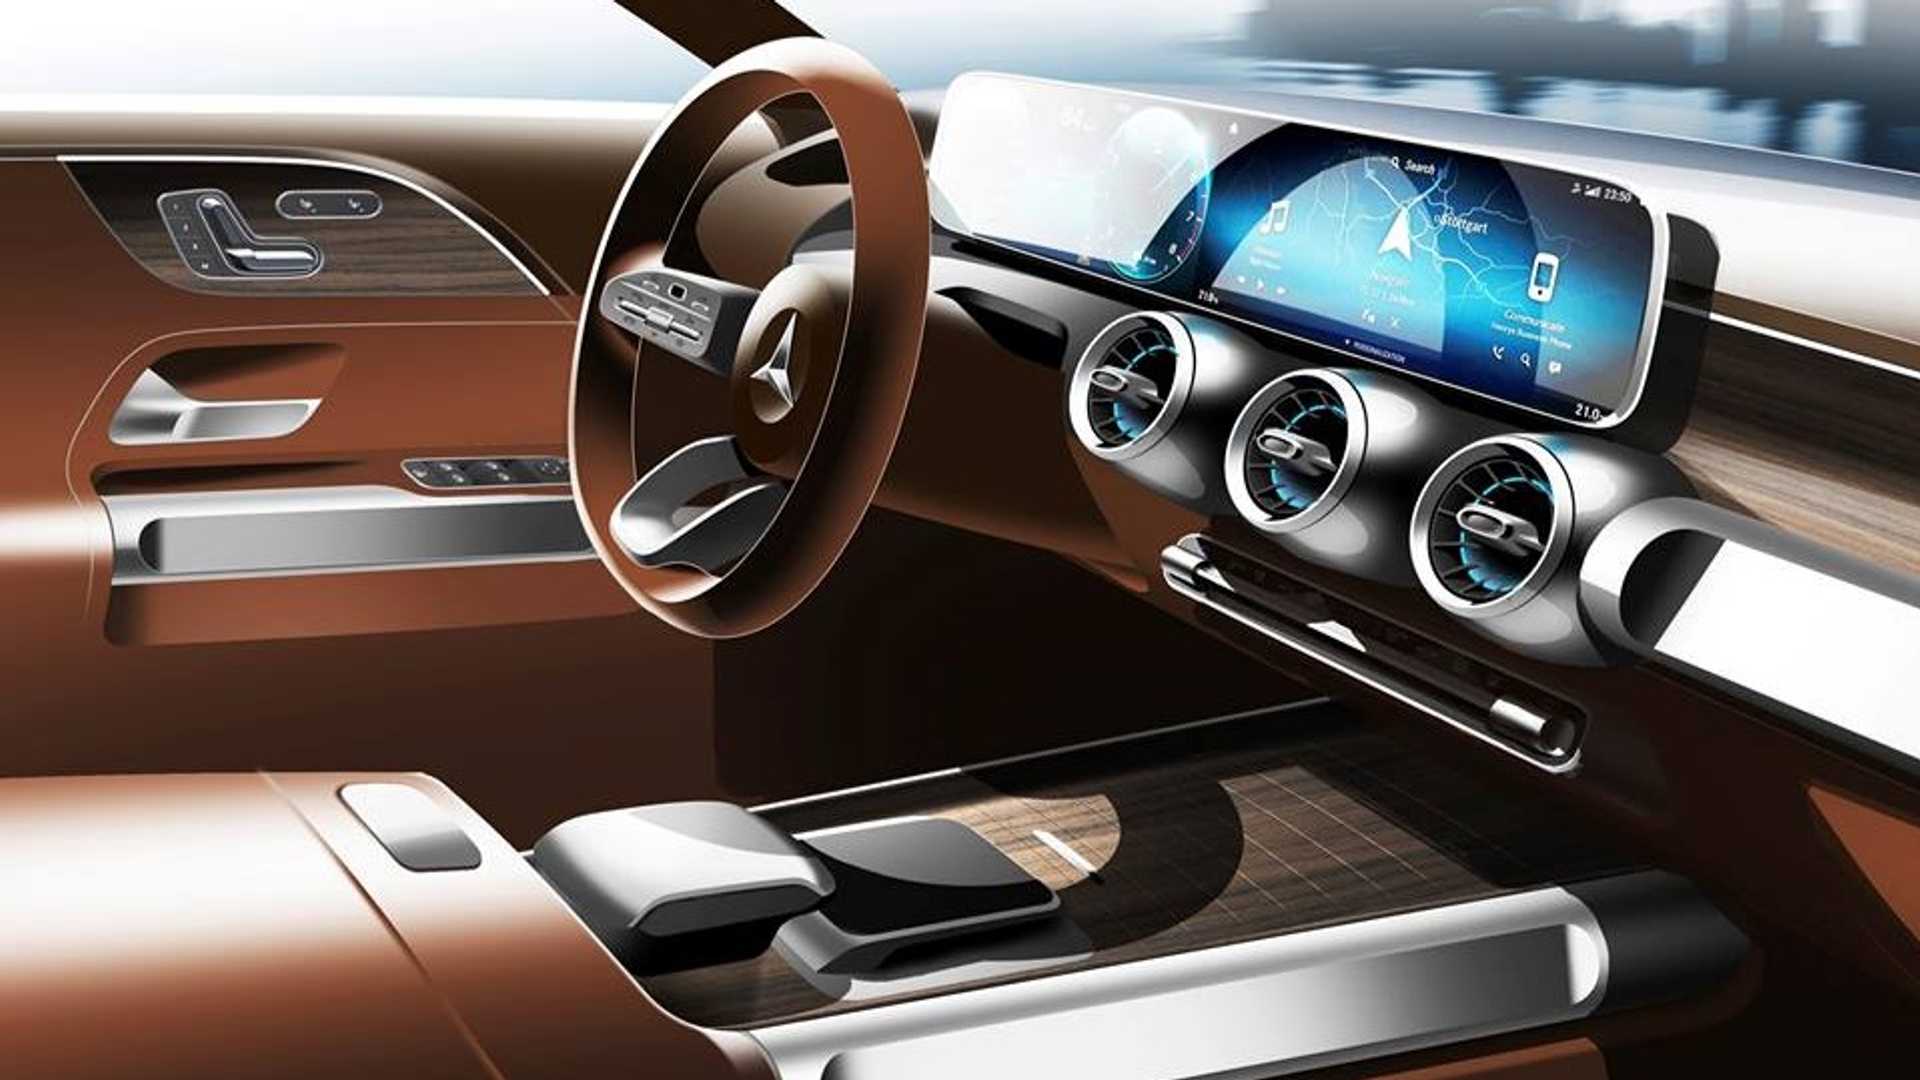 Mercedes Benz Glb To Debut In Concept Guise At Shanghai Auto Show First Interior Picture Mercedesblog